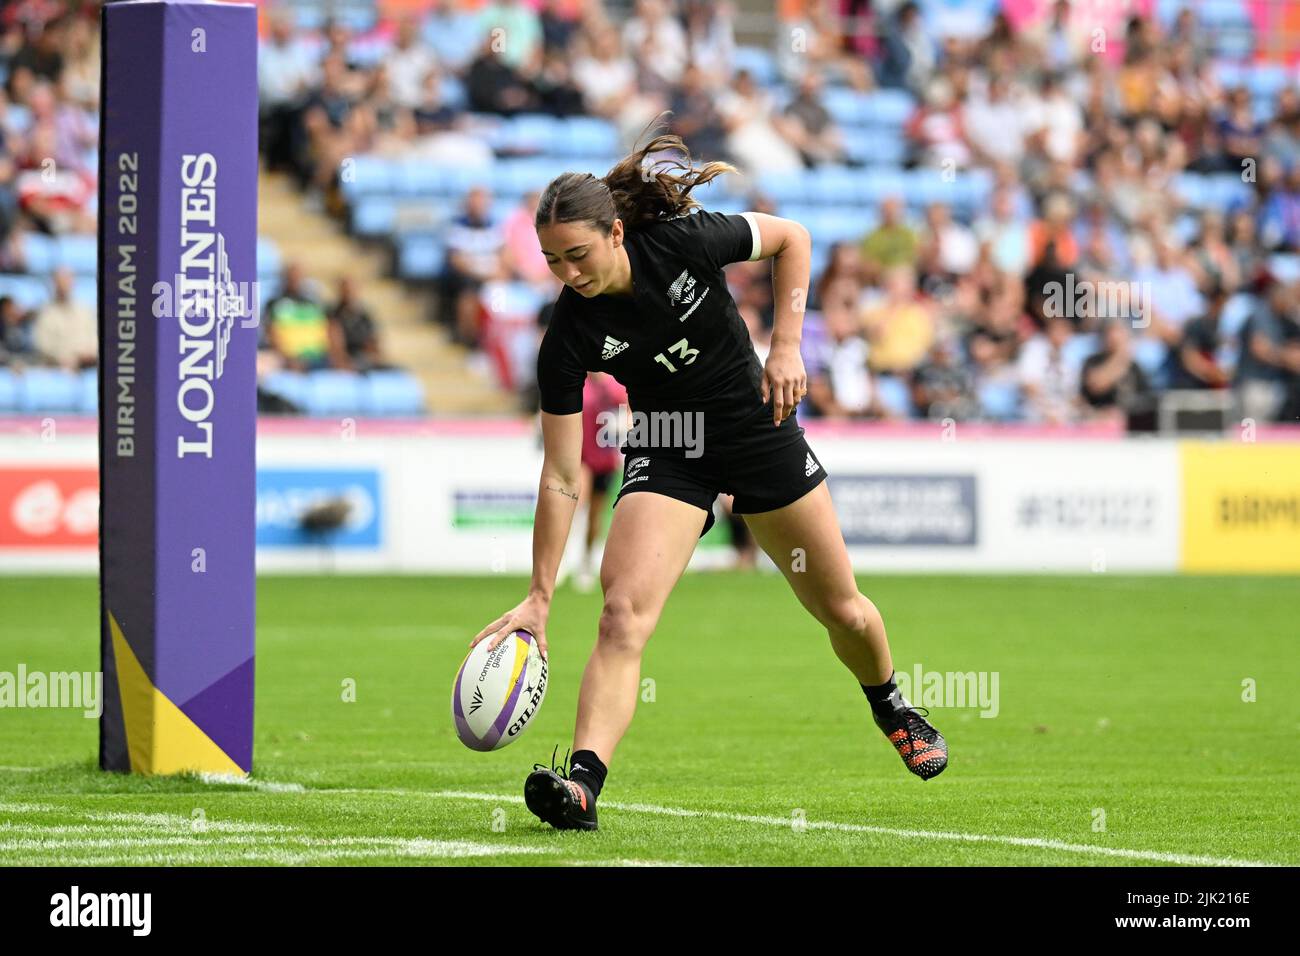 Jazmin Felix-Hotham of New Zealand scores a try against Sri Lanka during the Rugby Sevens at the Commonwealth Games at Coventry Stadium on Friday 29th July 2022